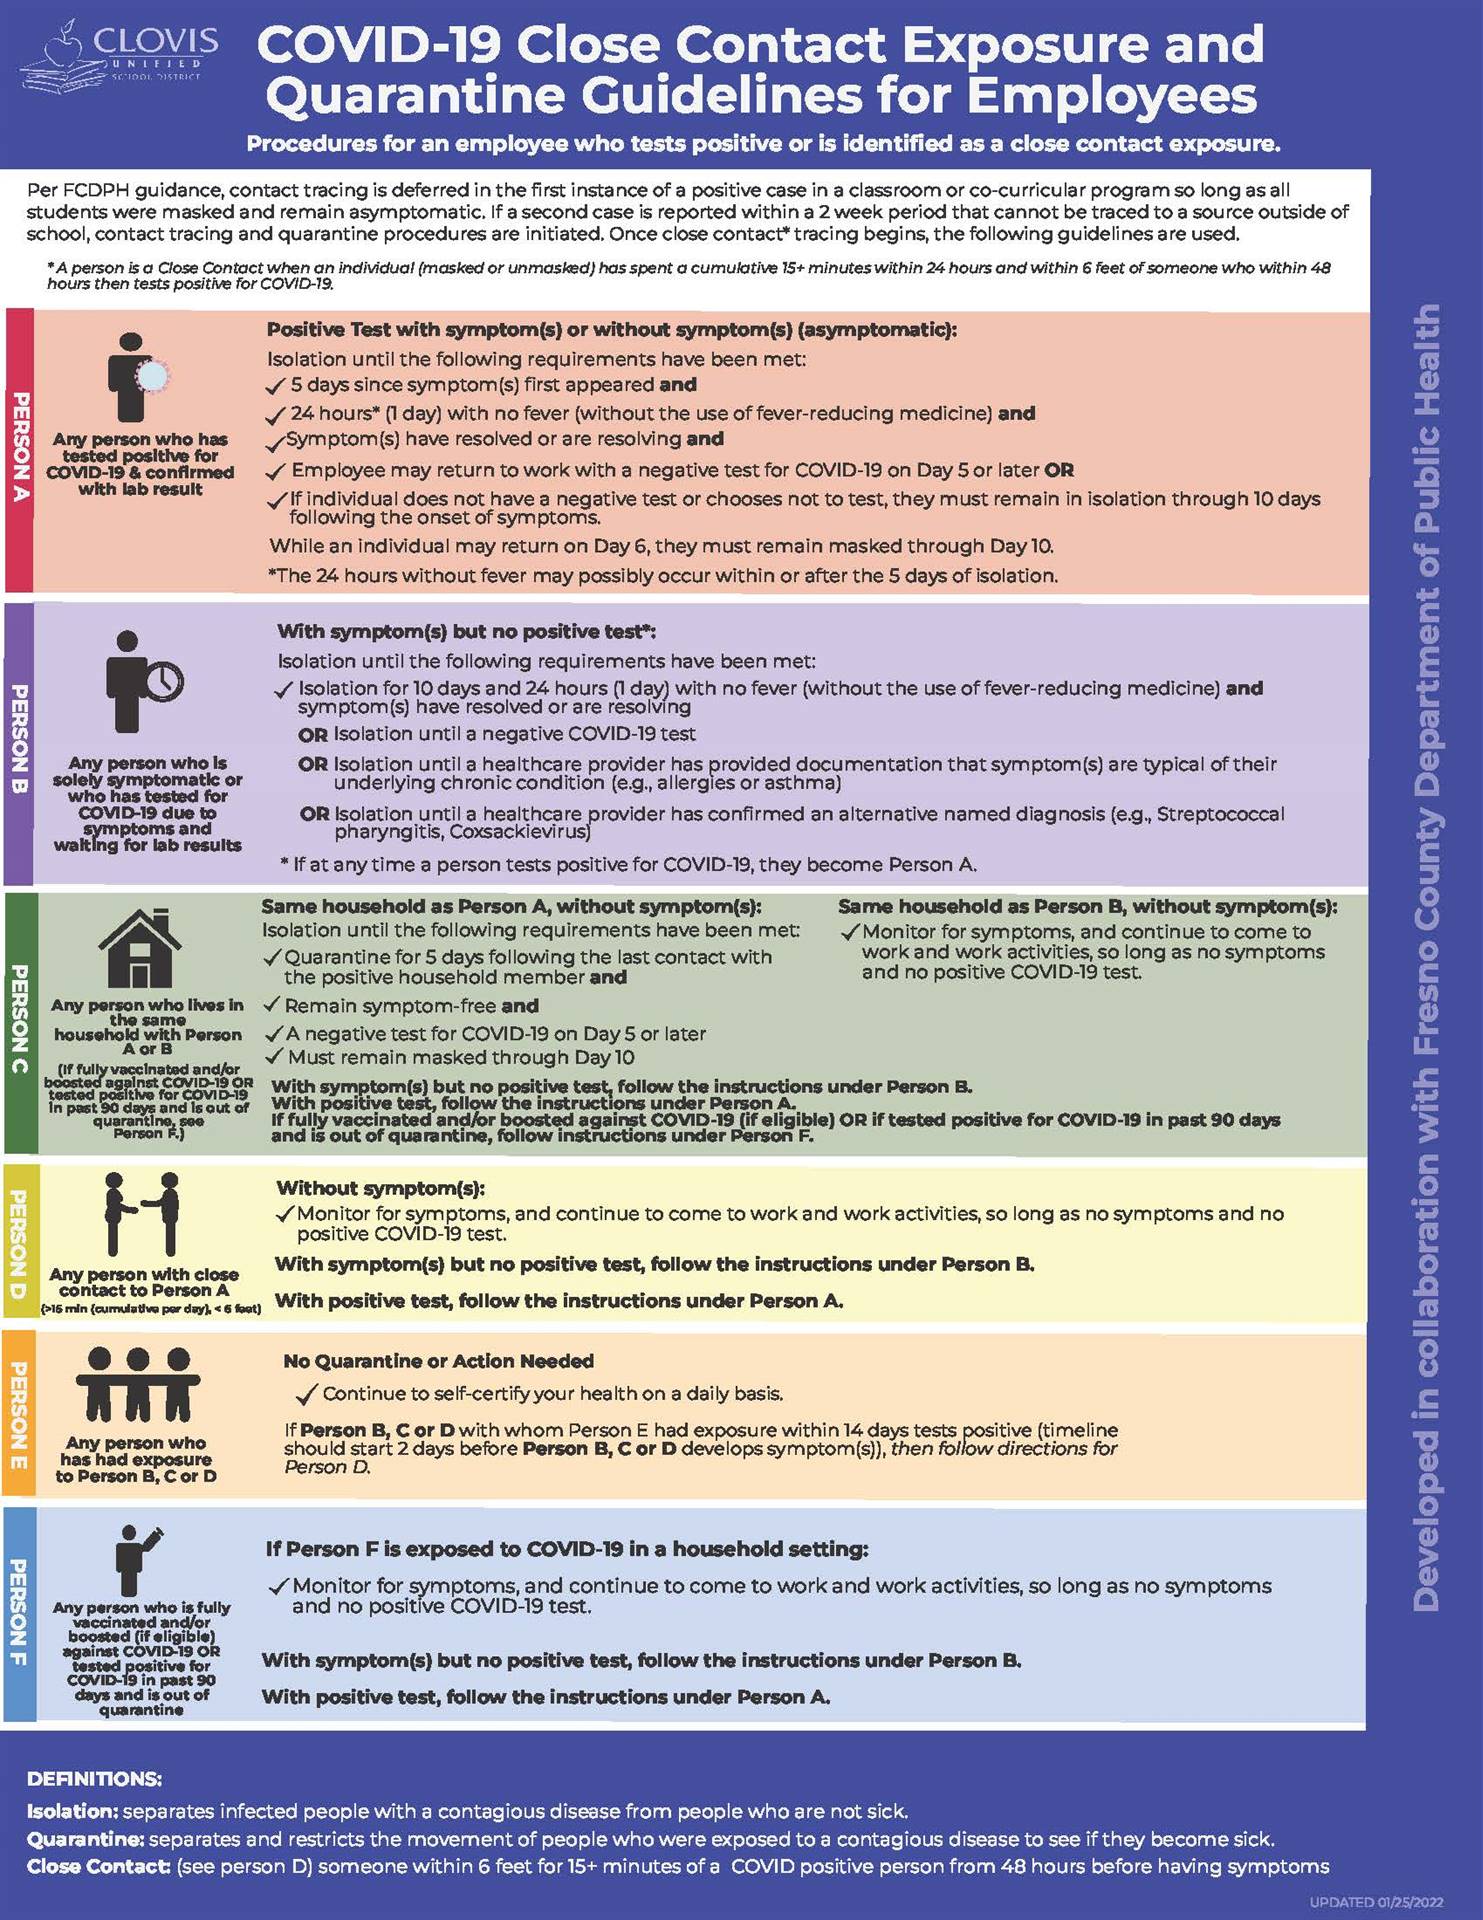 Employee Quarantine Guidelines - full copy downloadable at right